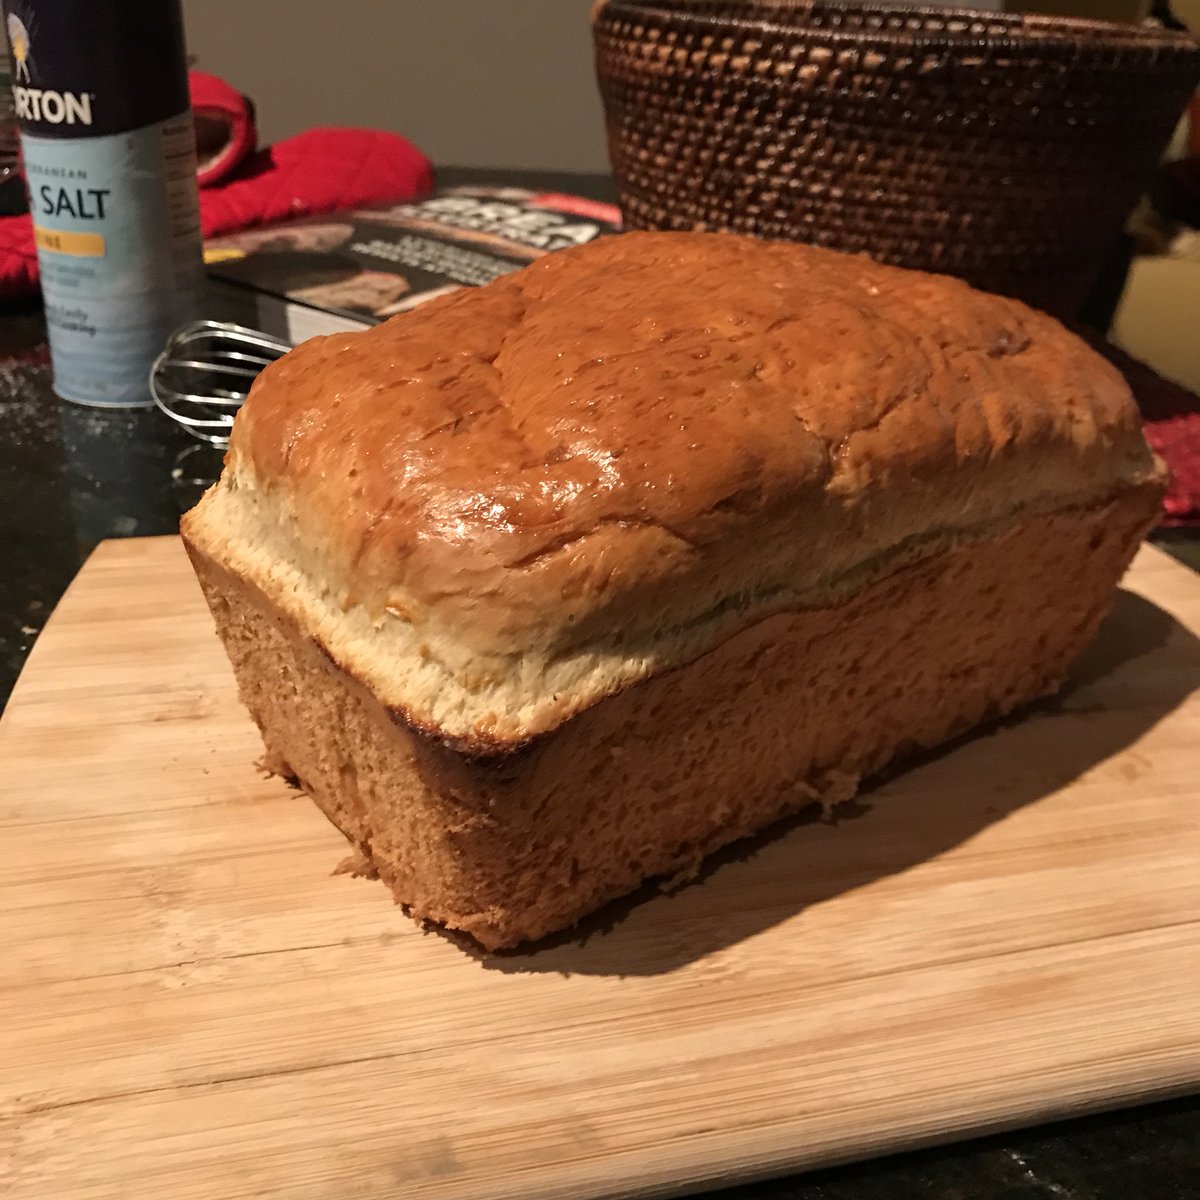 Bread #6: Easy Sandwich Bread. This is, as the title suggests, an everyday bread like you’d buy at the store for sandwiches, toast, etc. also indeed easy. It’s extremely pretty [no filter here] It has a lovely texture and is relatively fast to make because the rise is short.